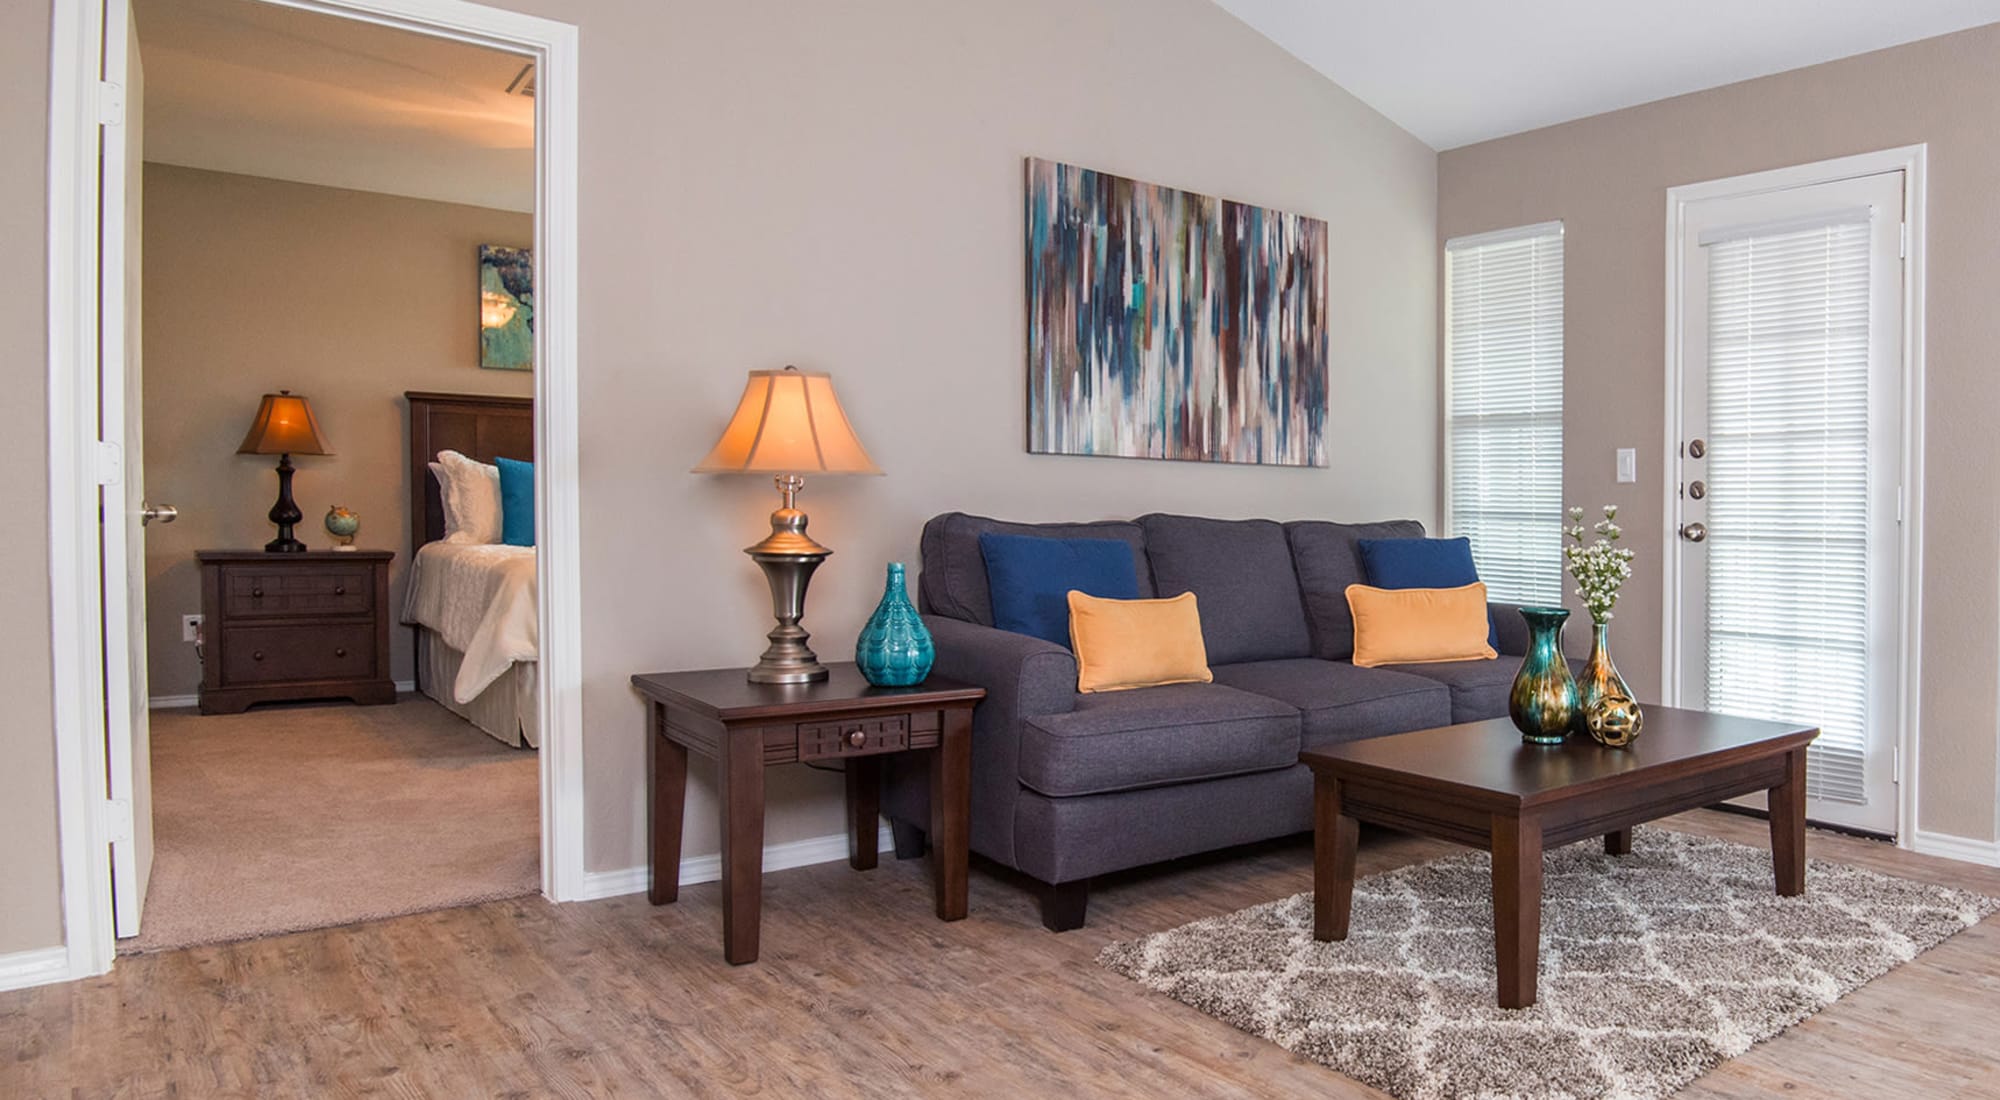 Living Room and Bedroom view at Carrollton Park of North Dallas